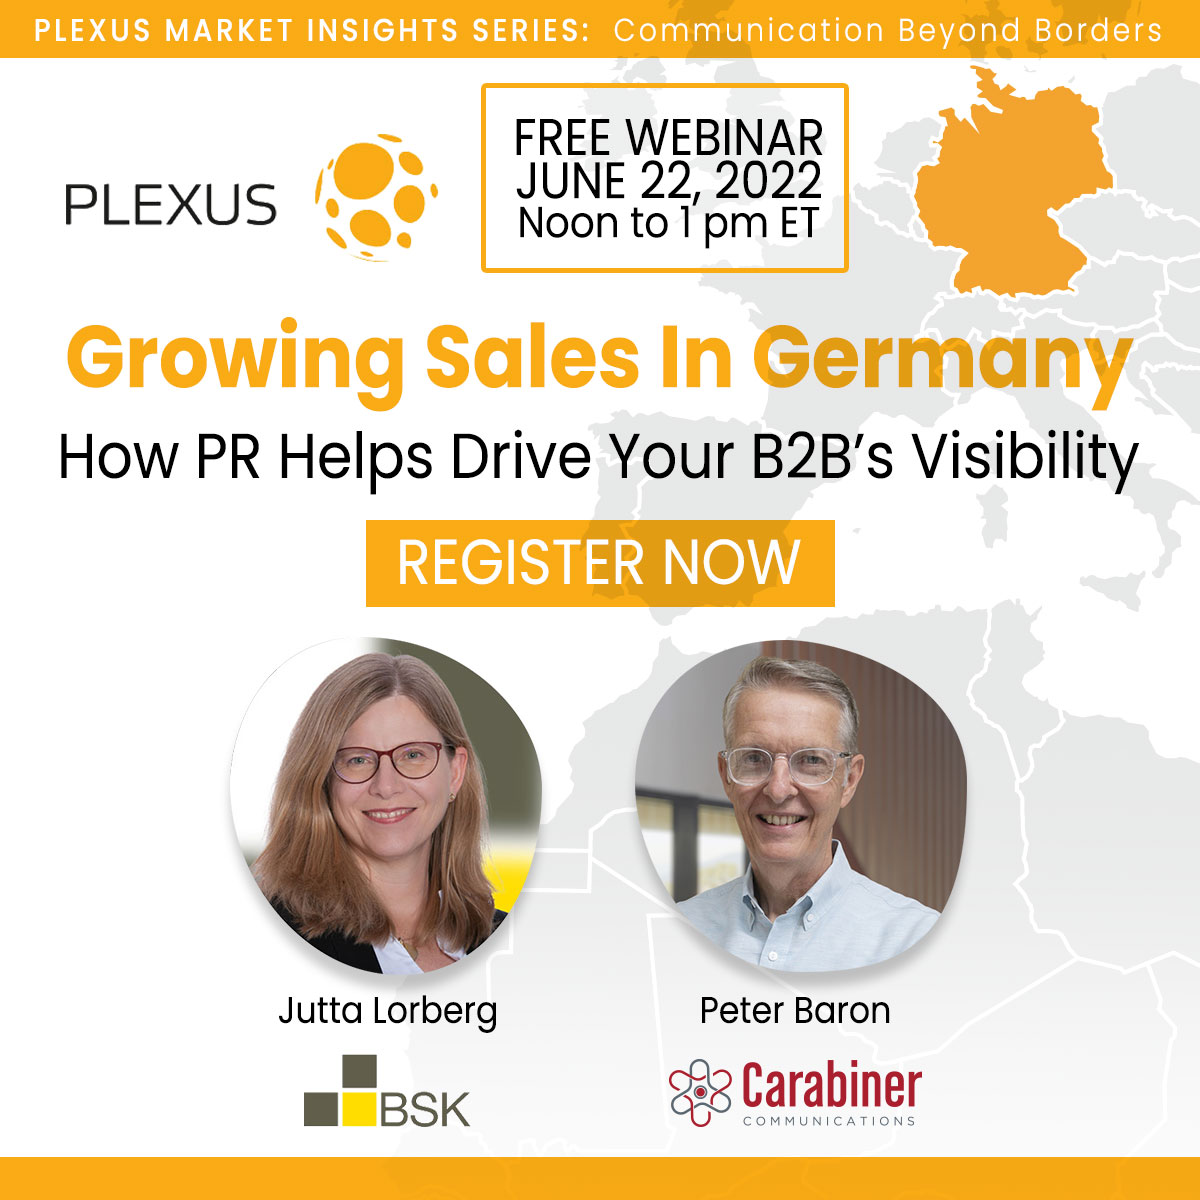 Growing Sales in Germany: How PR Helps Drive Your B2B’s Visibility